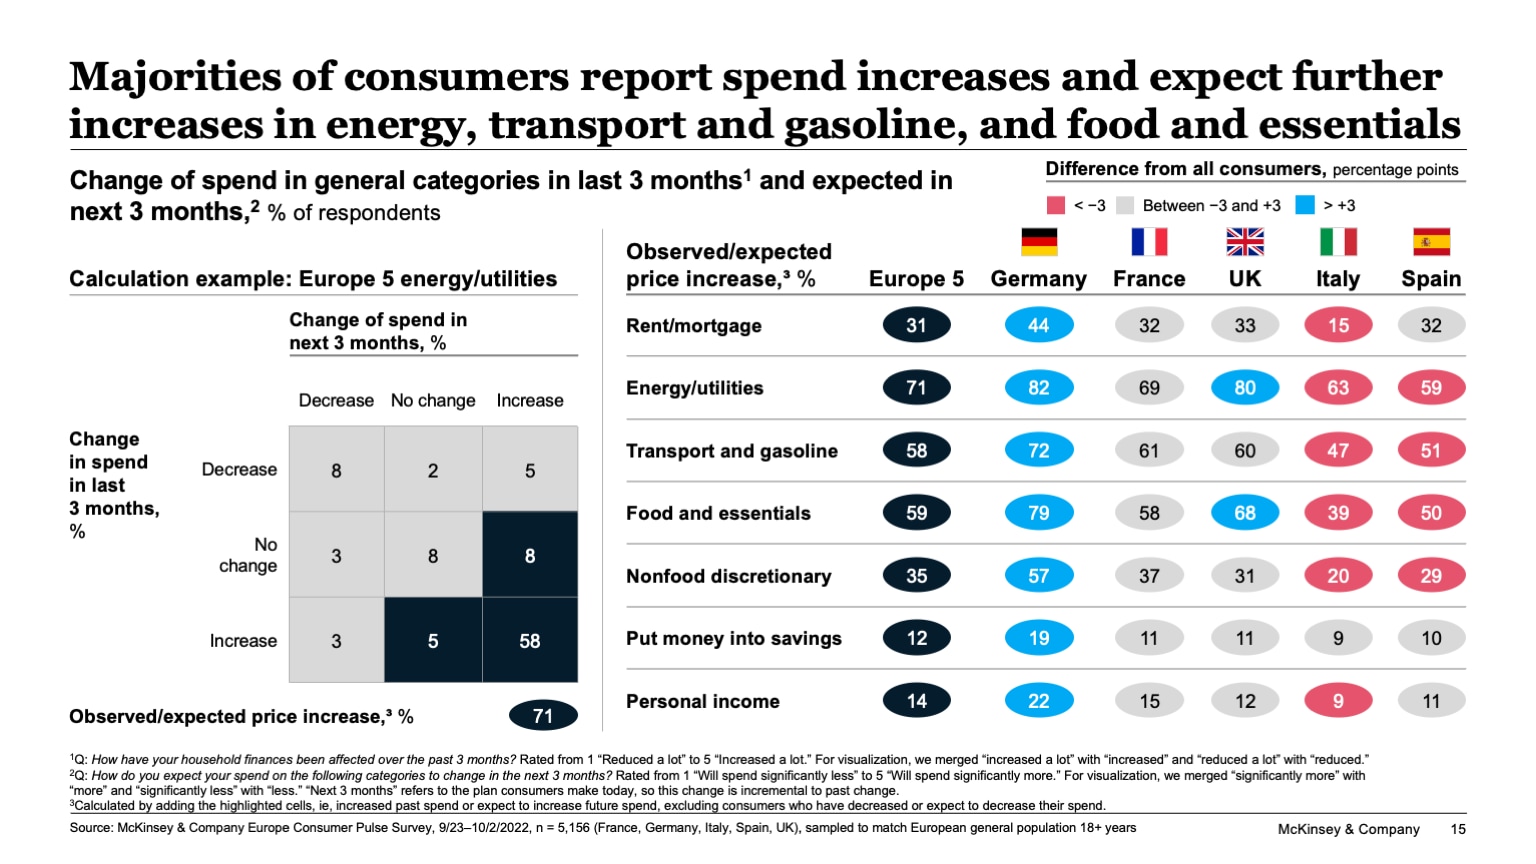 Majorities of consumers report spend increases and expect further increases in energy, transport and gasoline, and food and essentials